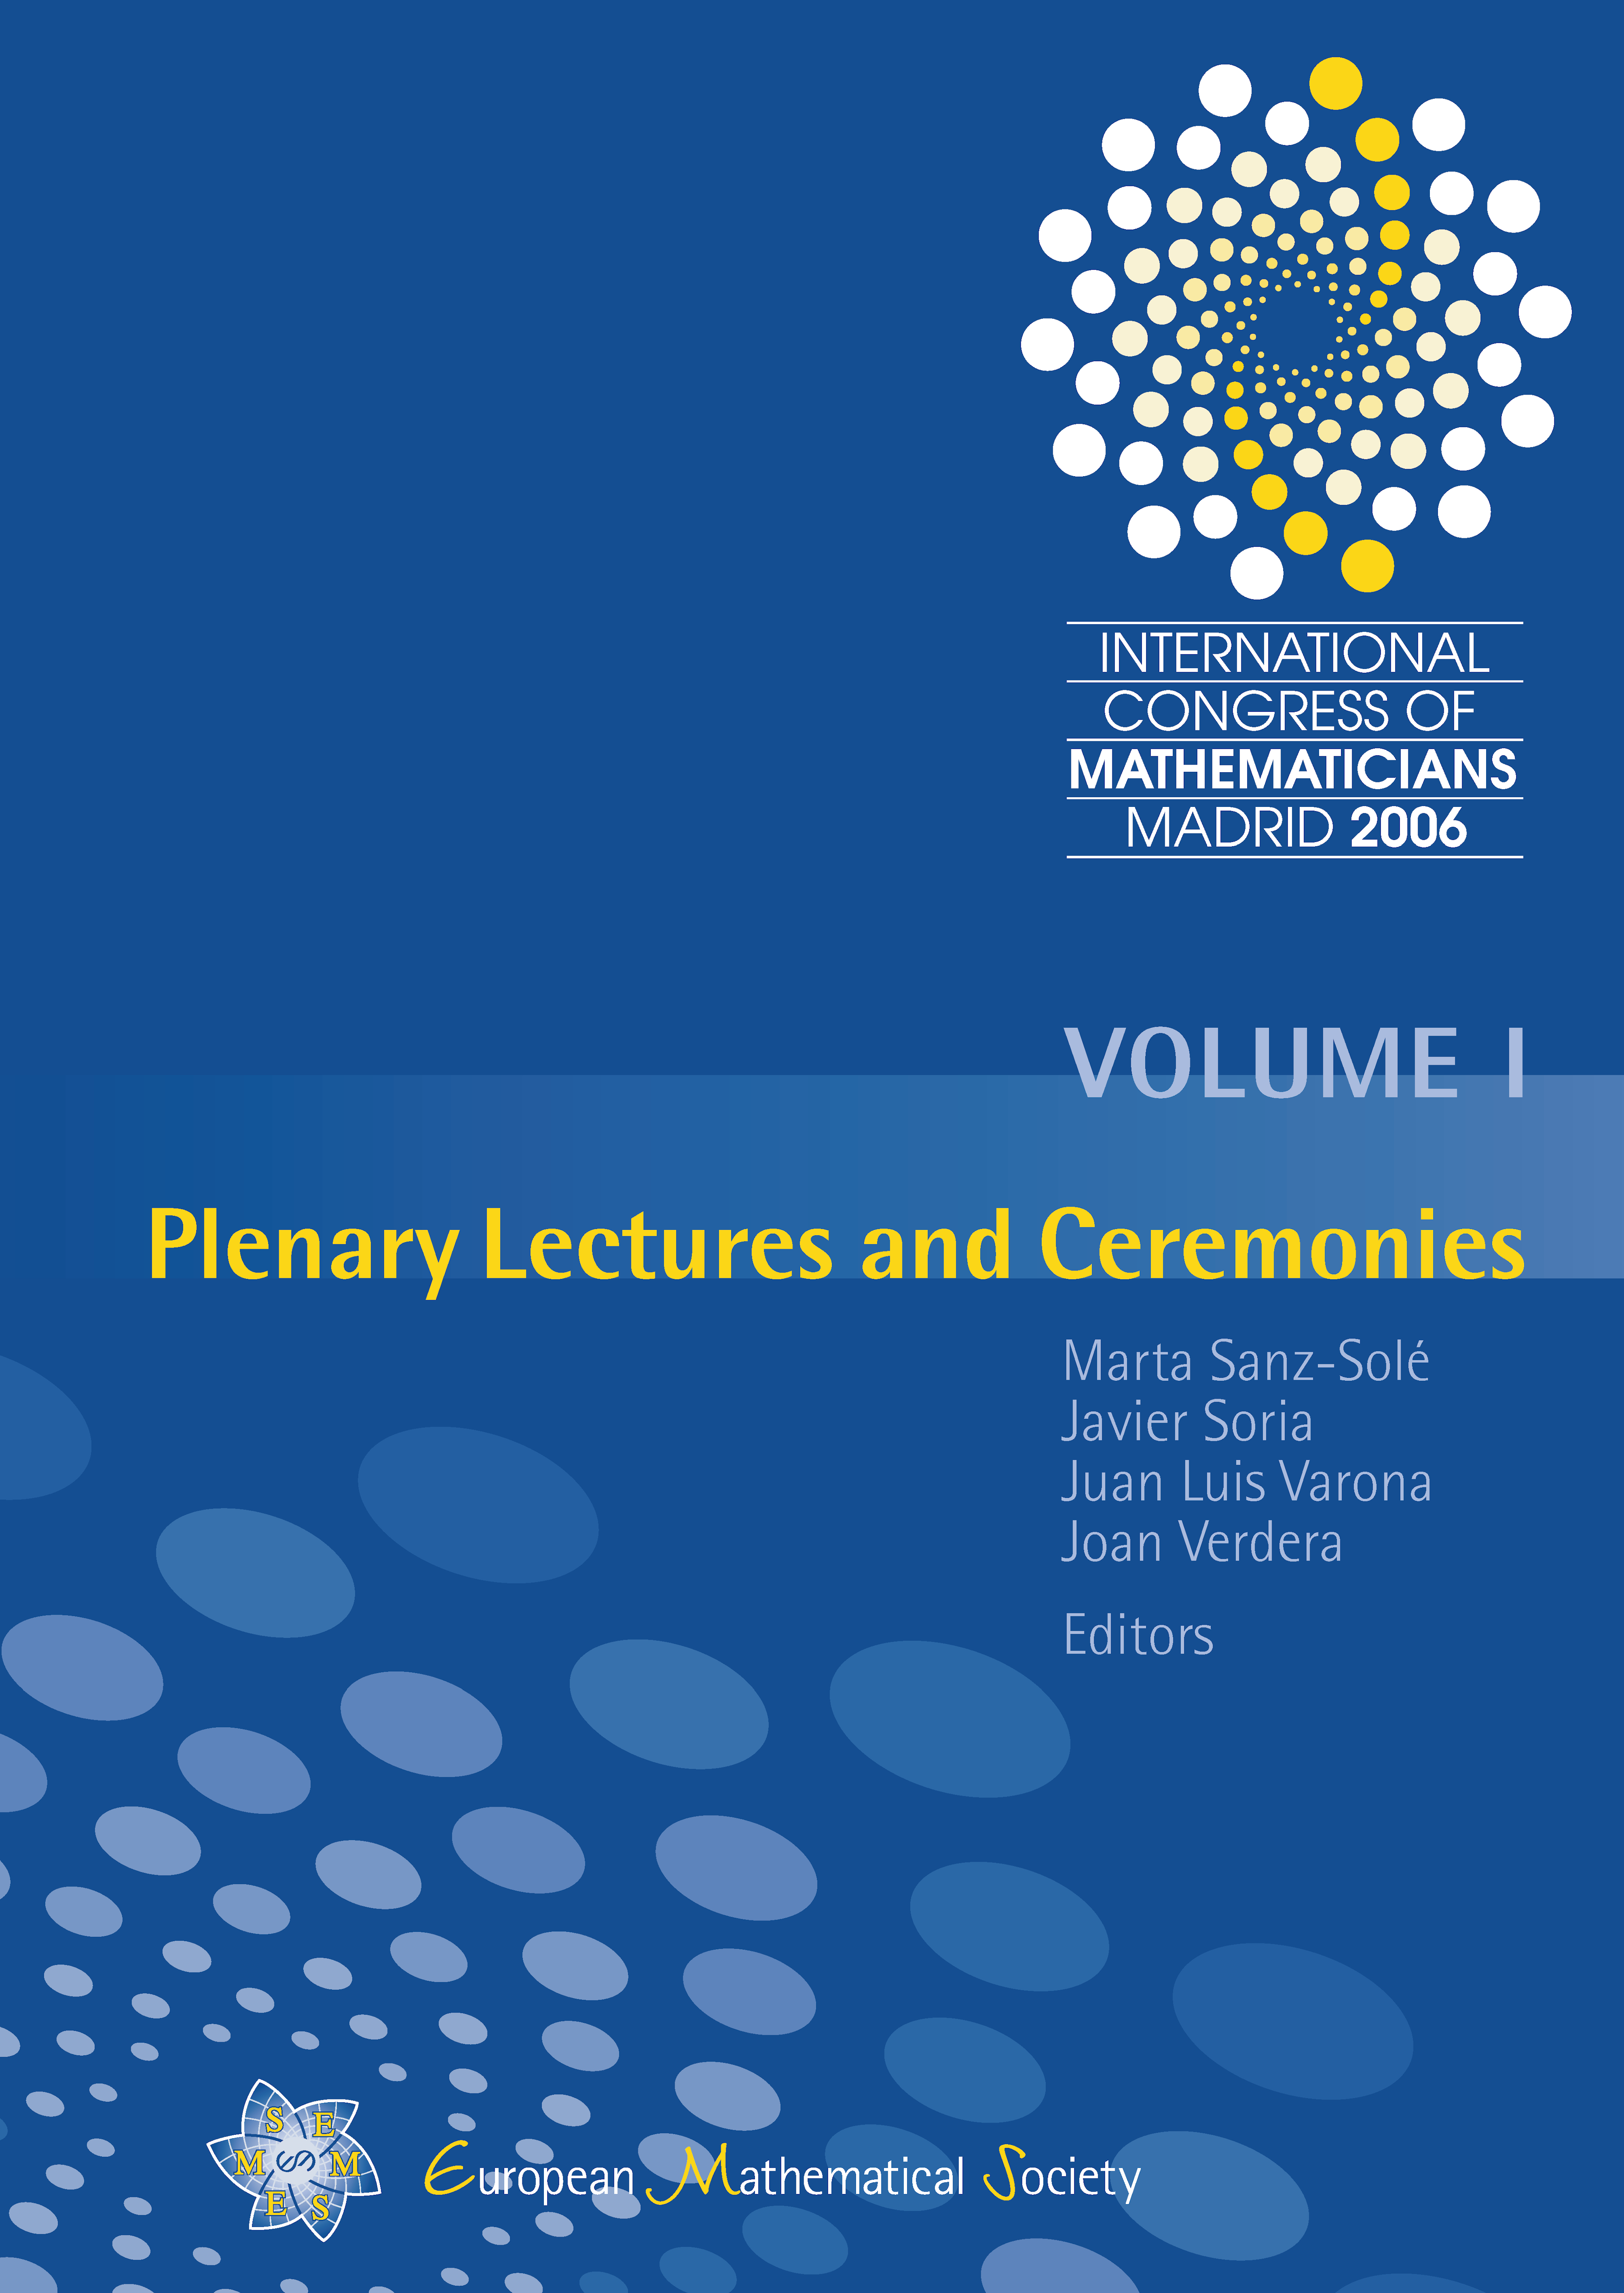 Proceedings of the International Congress of Mathematicians cover